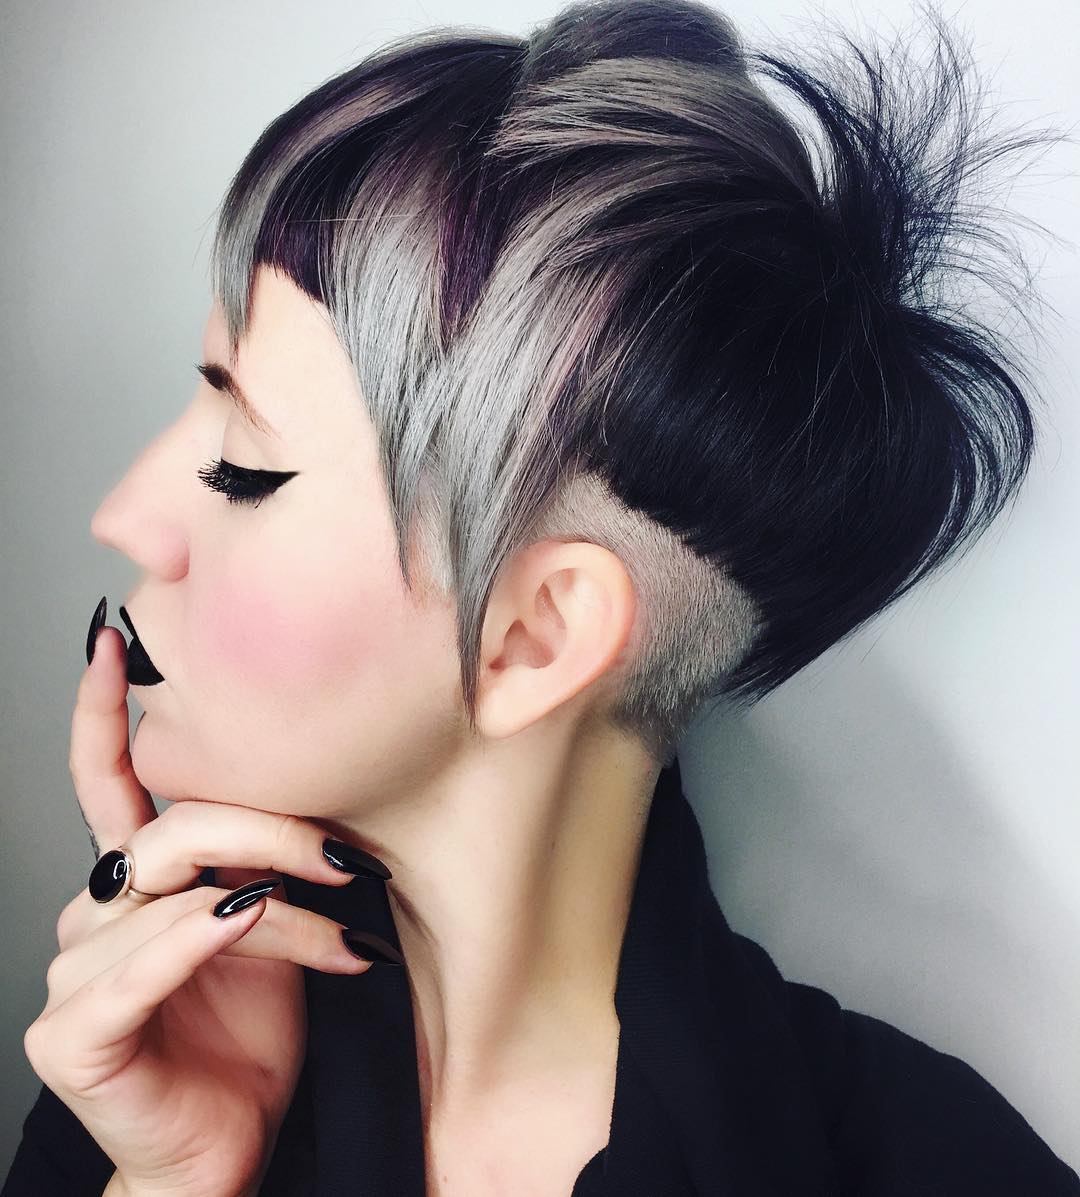 Stylish Pixie Haircut for Women, Short Hairstyles Designs